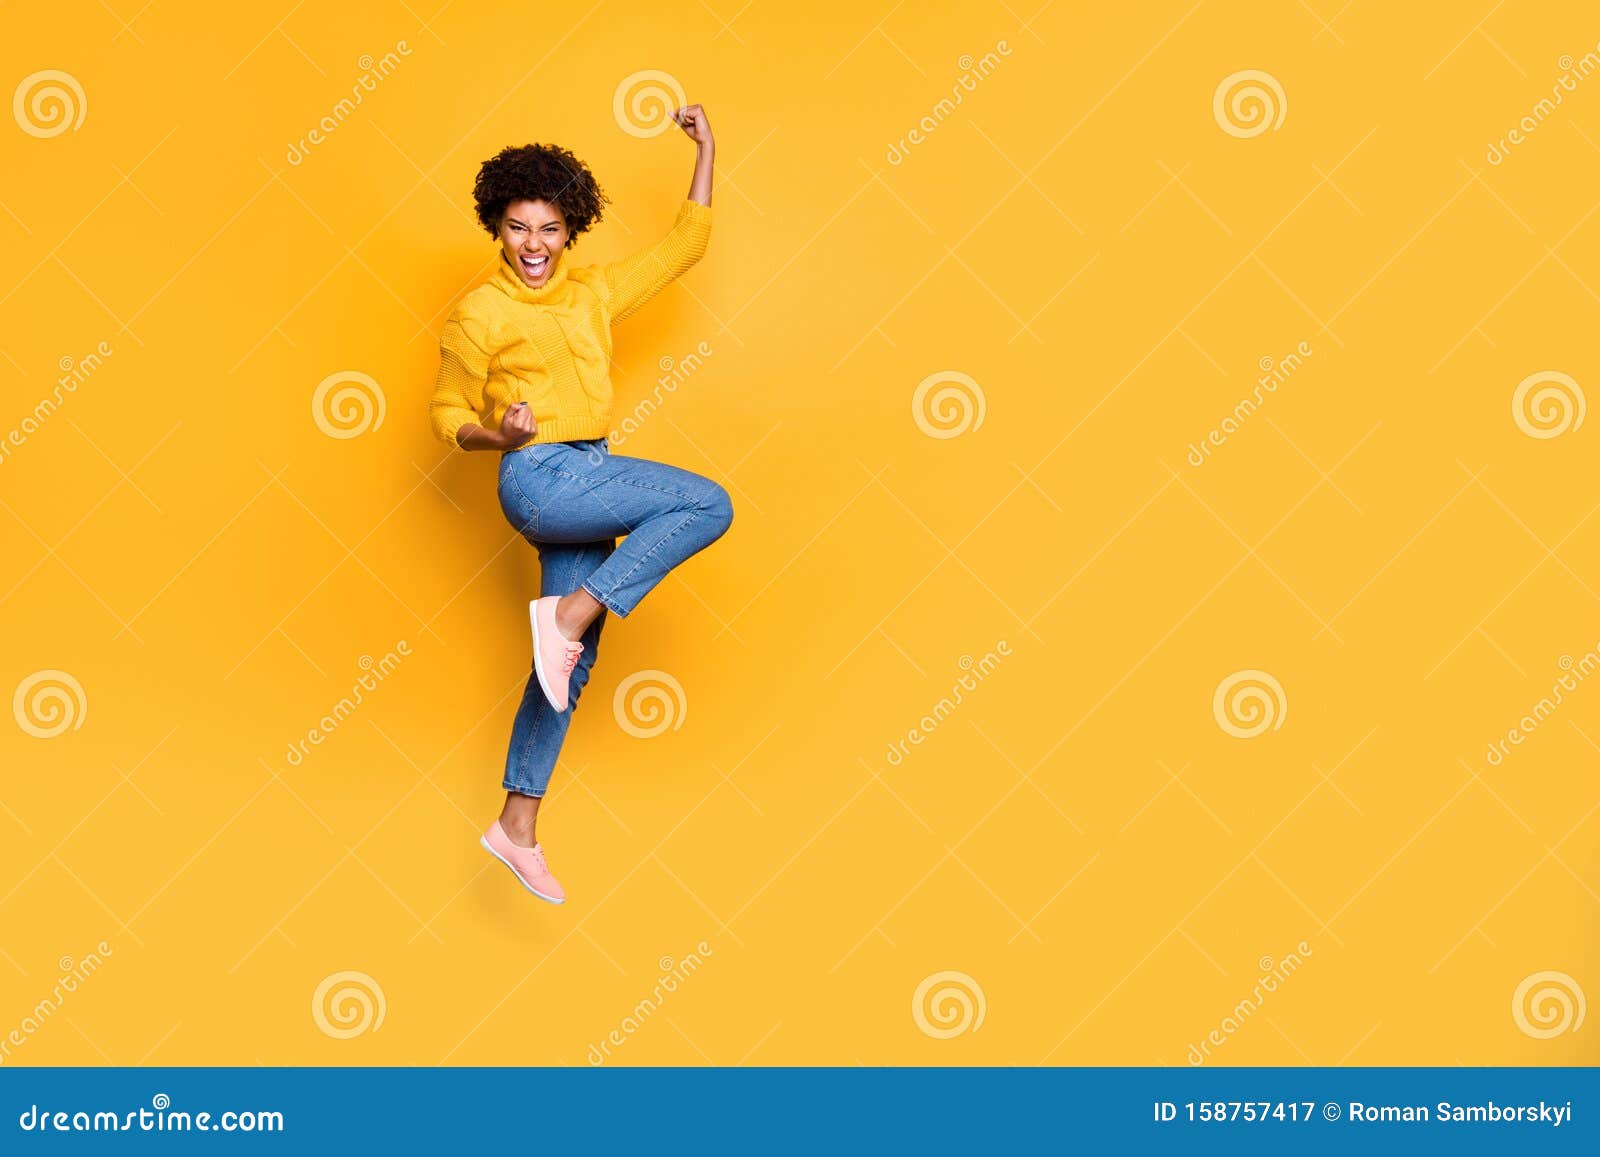 full length body size photo of jumping curly wavy strong and powerful black woman rejoicing with her victorious glory